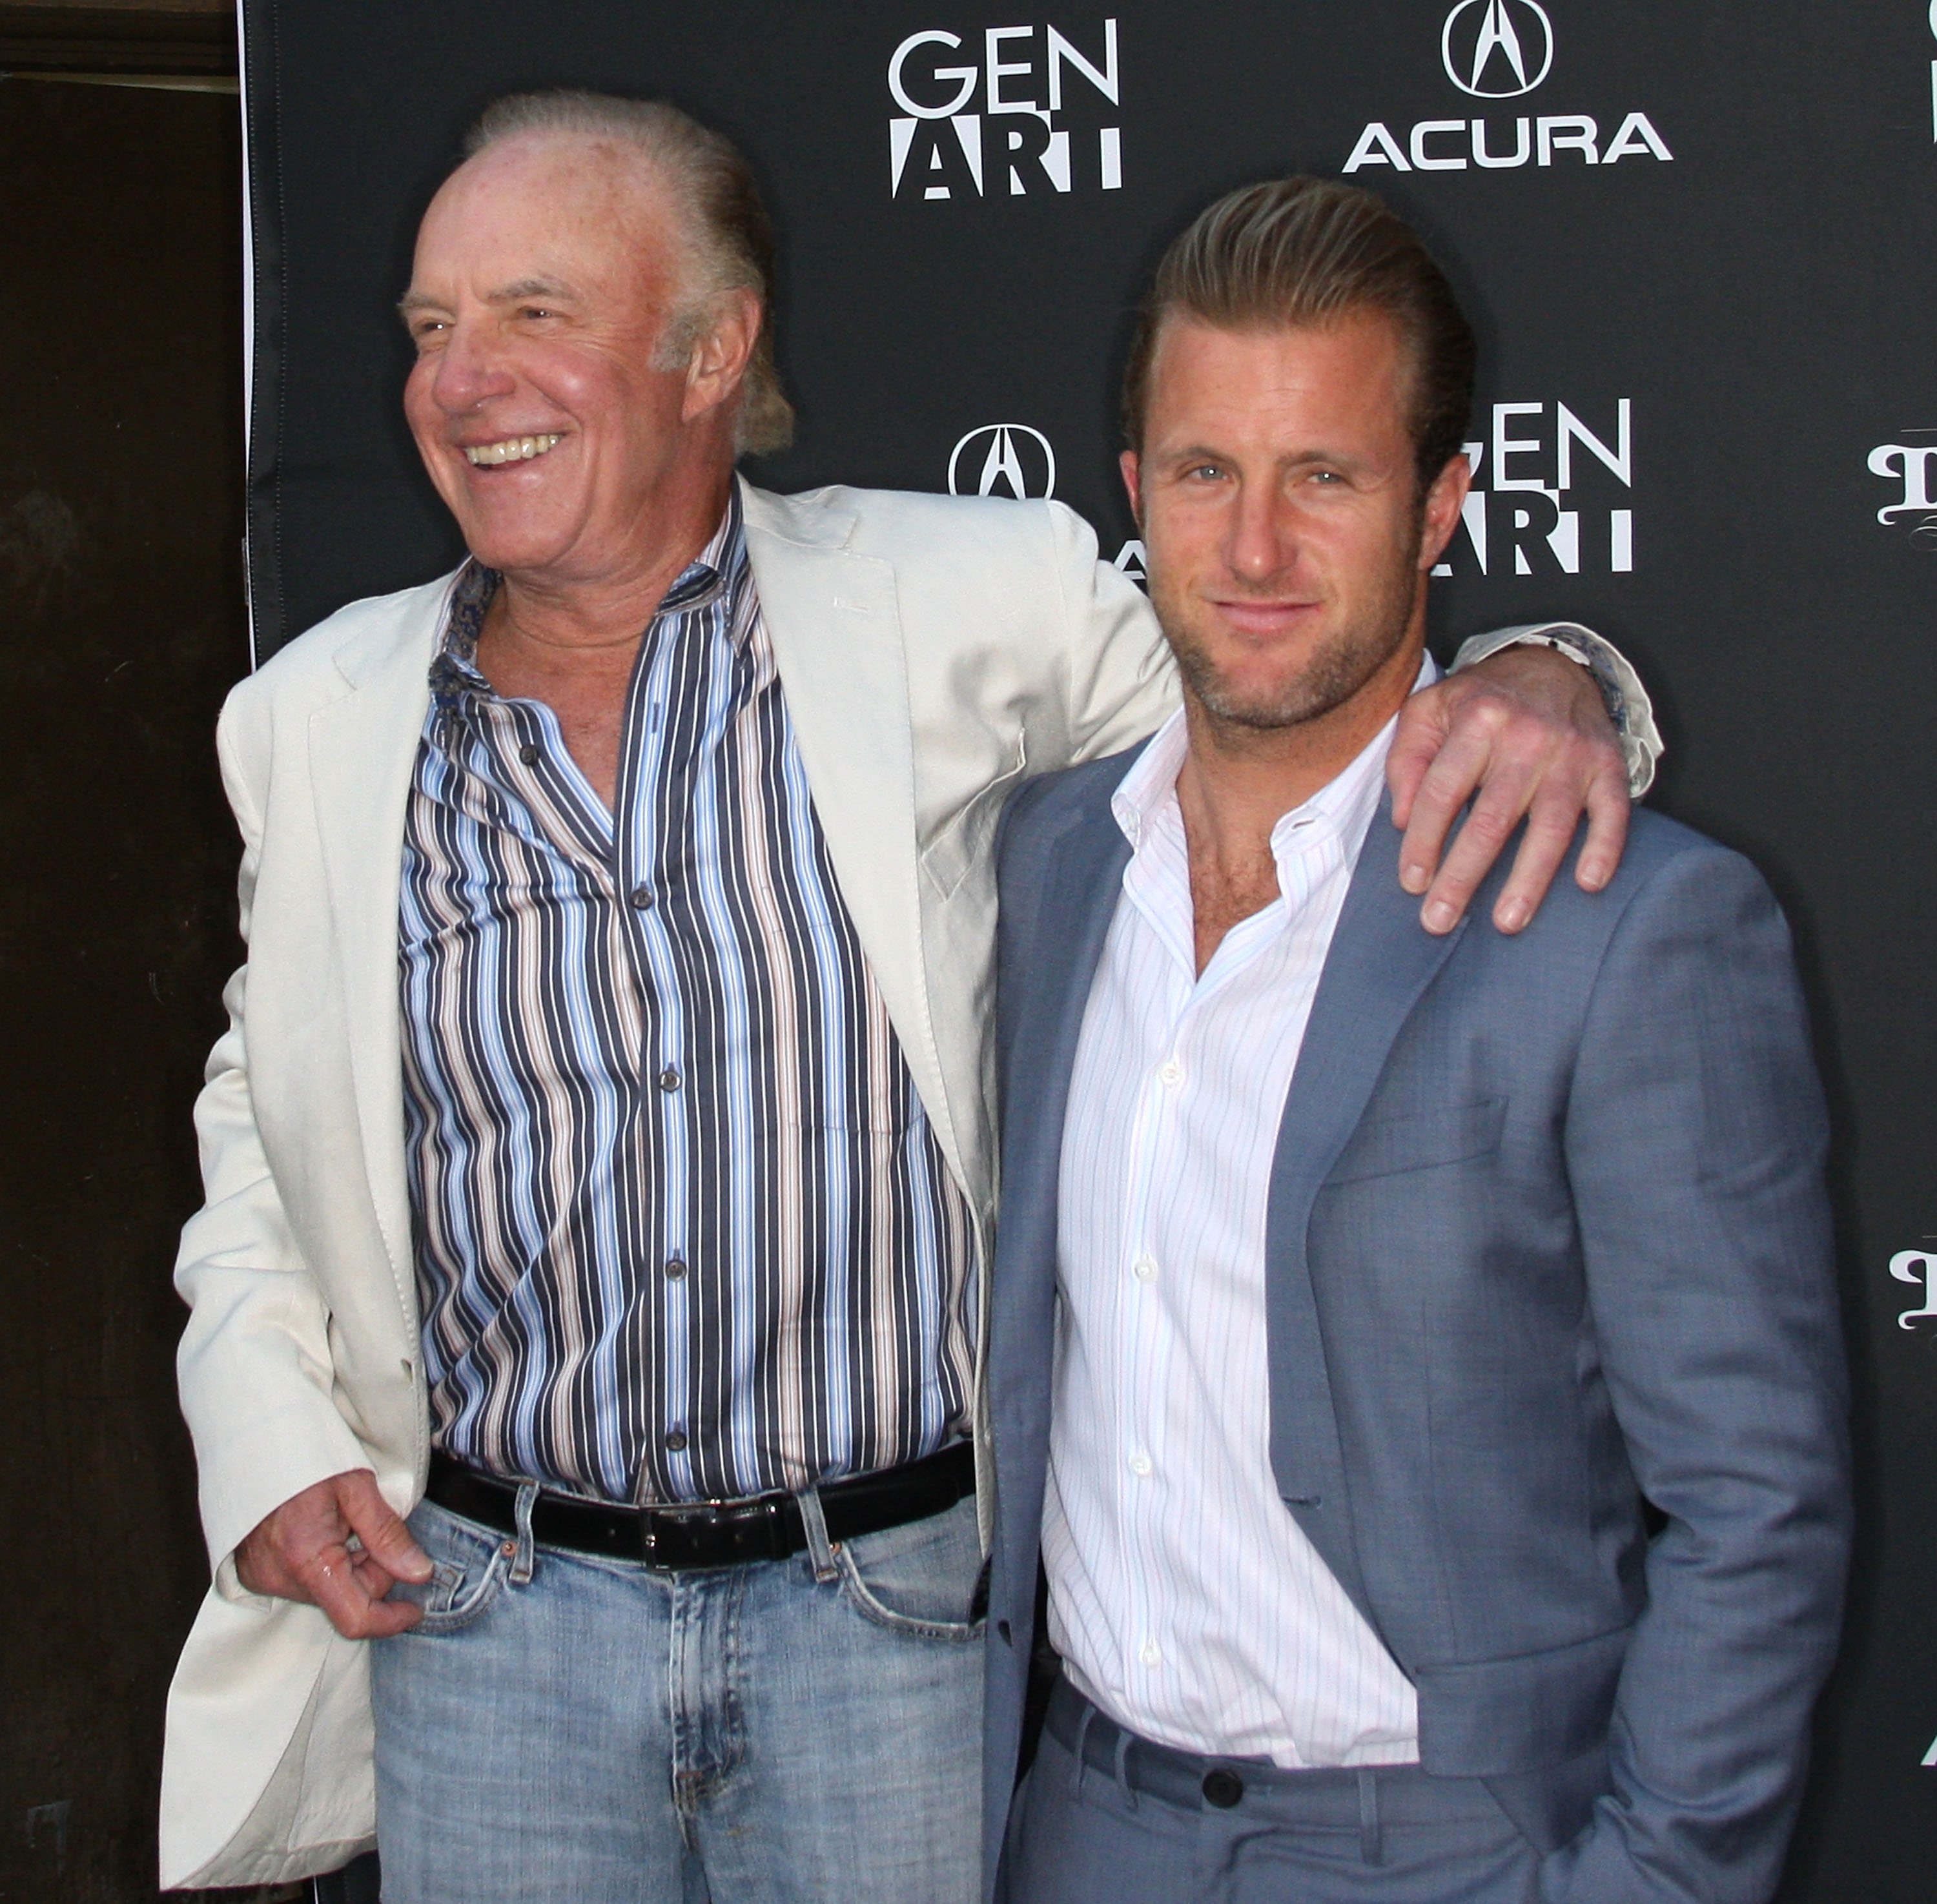 Actors James Caan and Scott Caan attend the "Mercy" film premiere at the Egyptian Theater on May 3, 2010 in Hollywood, California. | Source: Getty Images 